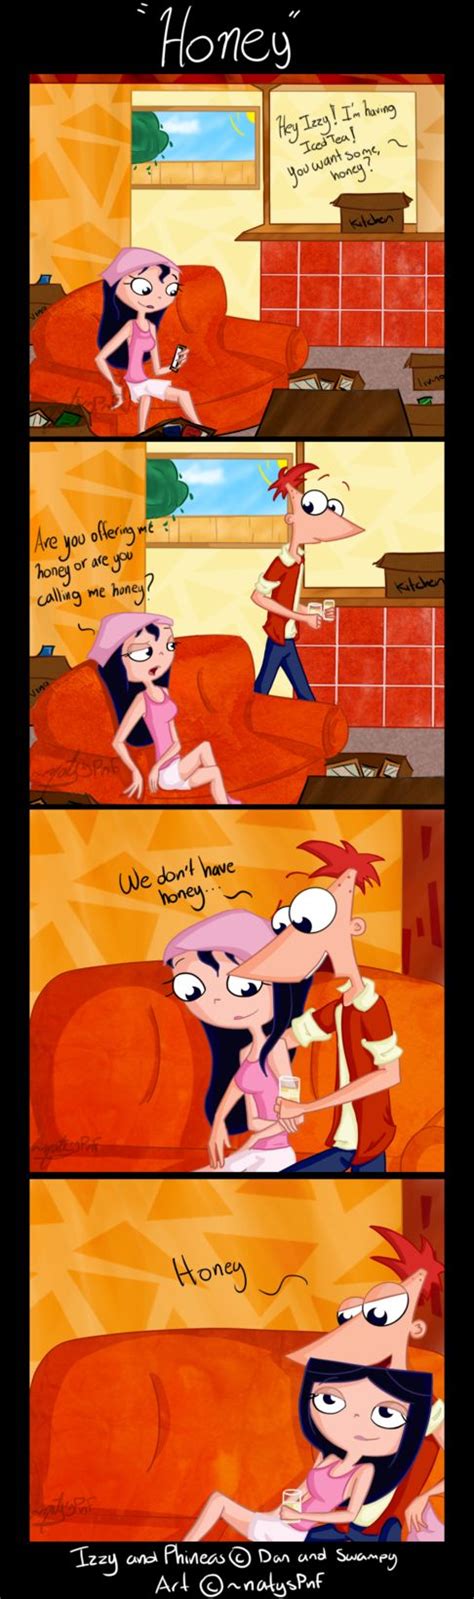 Comics About Phineas and Ferb Part 1 By Marina1423834 On . The Loud House Lini's Virginity Free Porn Comics. Red Head Chick Can't Resist Coming For A Taste Of Ferb's . Star Vs The Forces Of Evil Pack 2 Top Comics Porno . phineas and ferb gay sex, phineas and ferb lesbian sex, phineas and ferb naked sex, phineas and ferb mom sex, phineas and ferb isabella and phineas sex, phineas and ferb sex ...